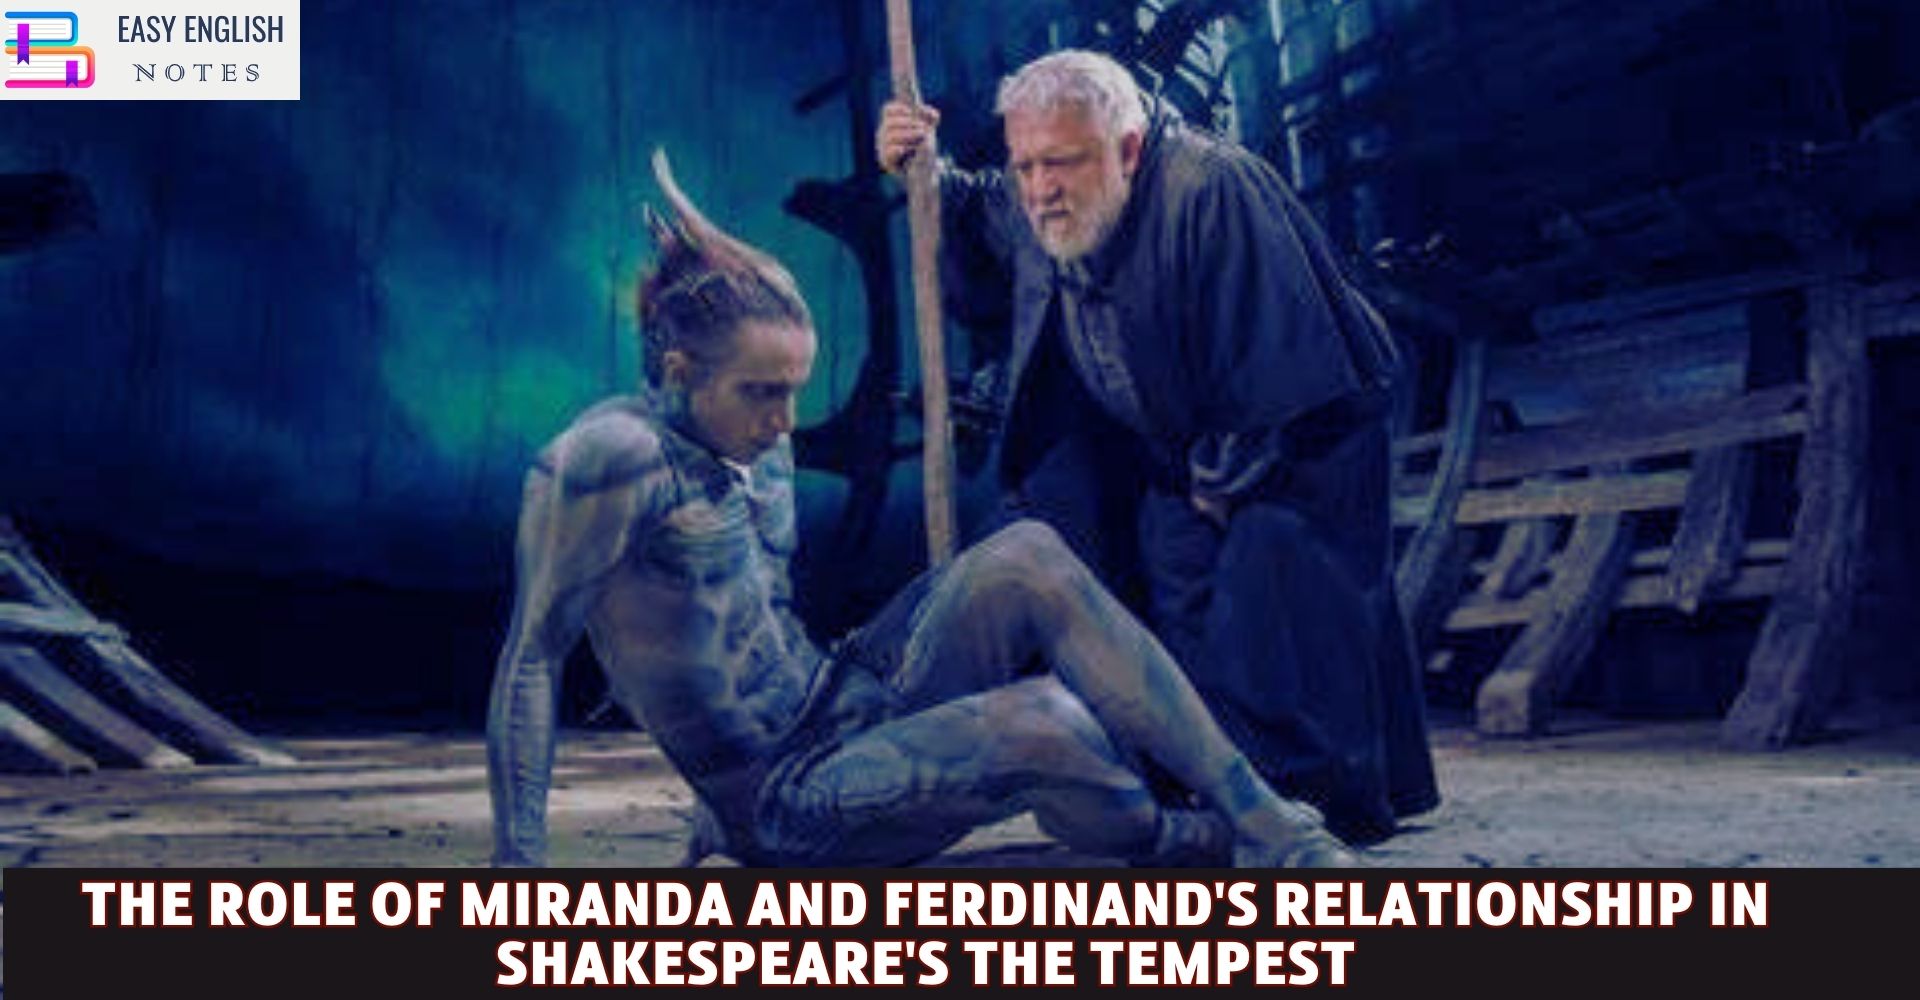 The Role of Miranda and Ferdinand's Relationship in Shakespeare's The Tempest